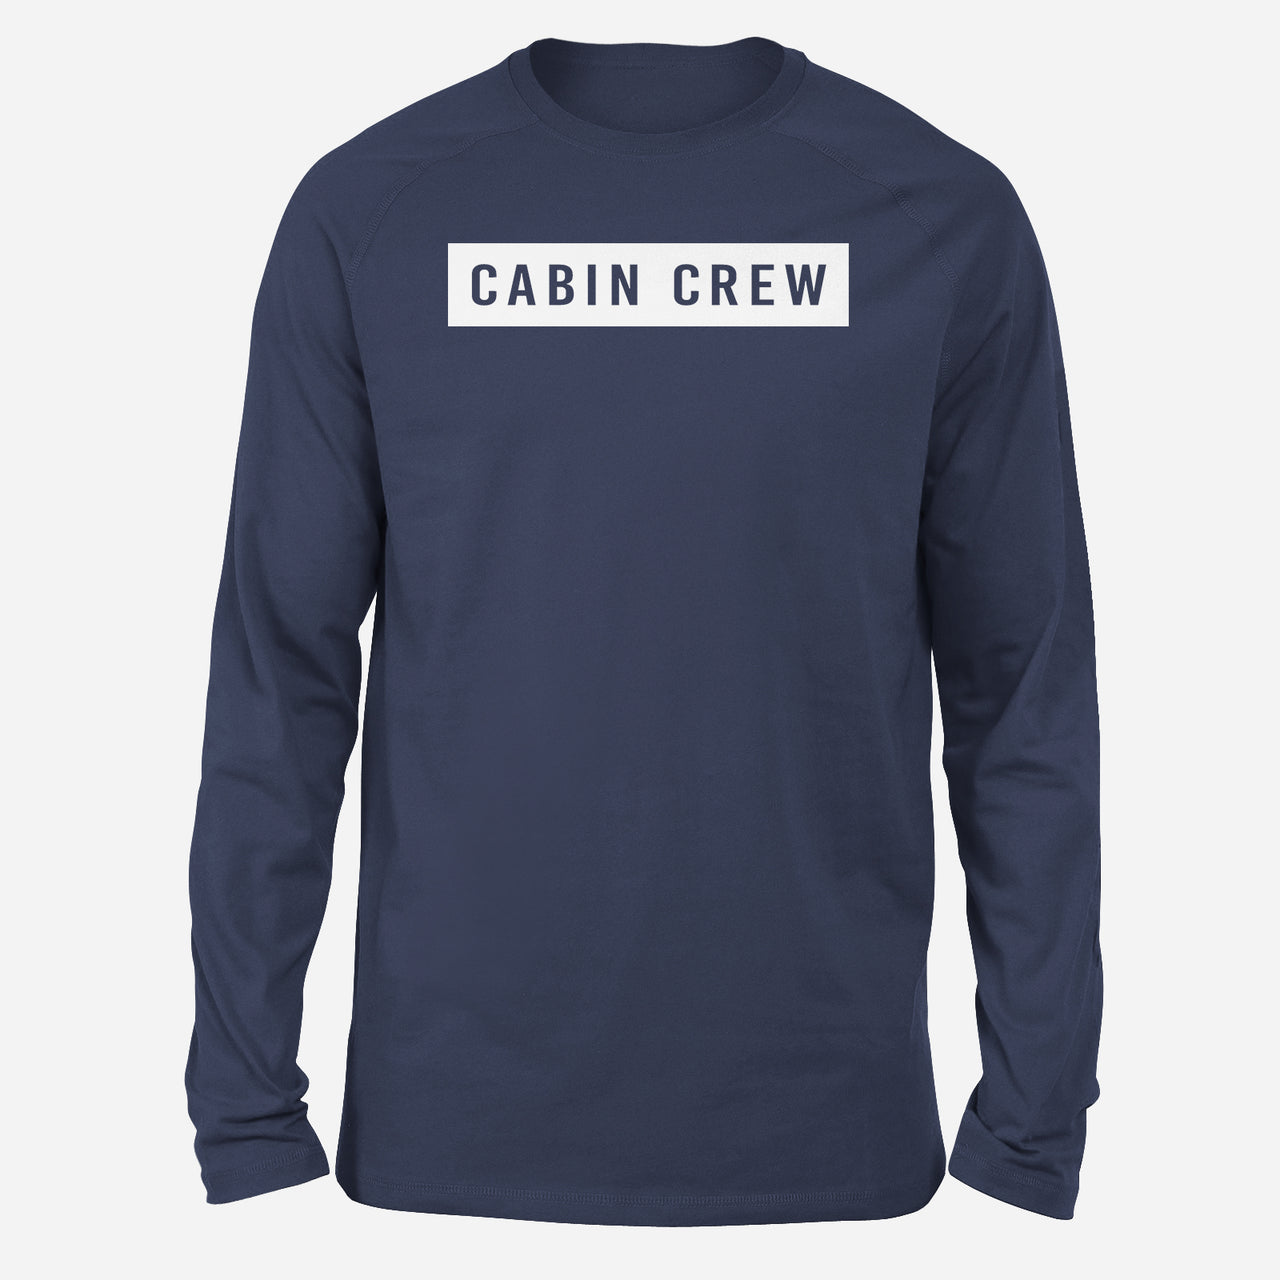 Cabin Crew Text Designed Long-Sleeve T-Shirts